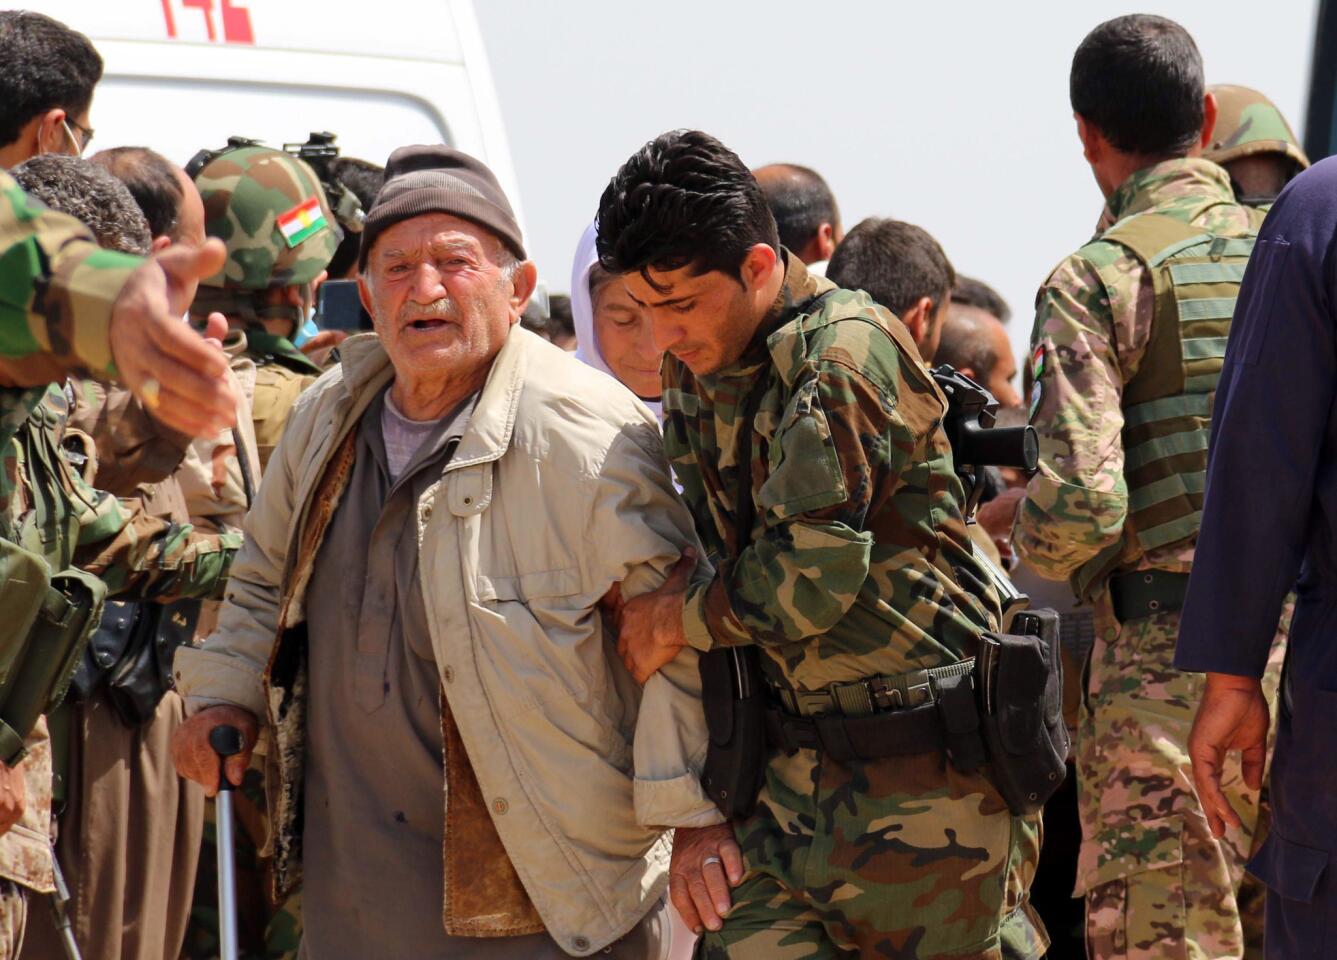 Kurdish Peshmerga forces help people from Iraq's Yazidi minority in the village of al-Humeira on April 8, 2015 after the Islamic State group freed more than 200 Yazidis it held captive for months.